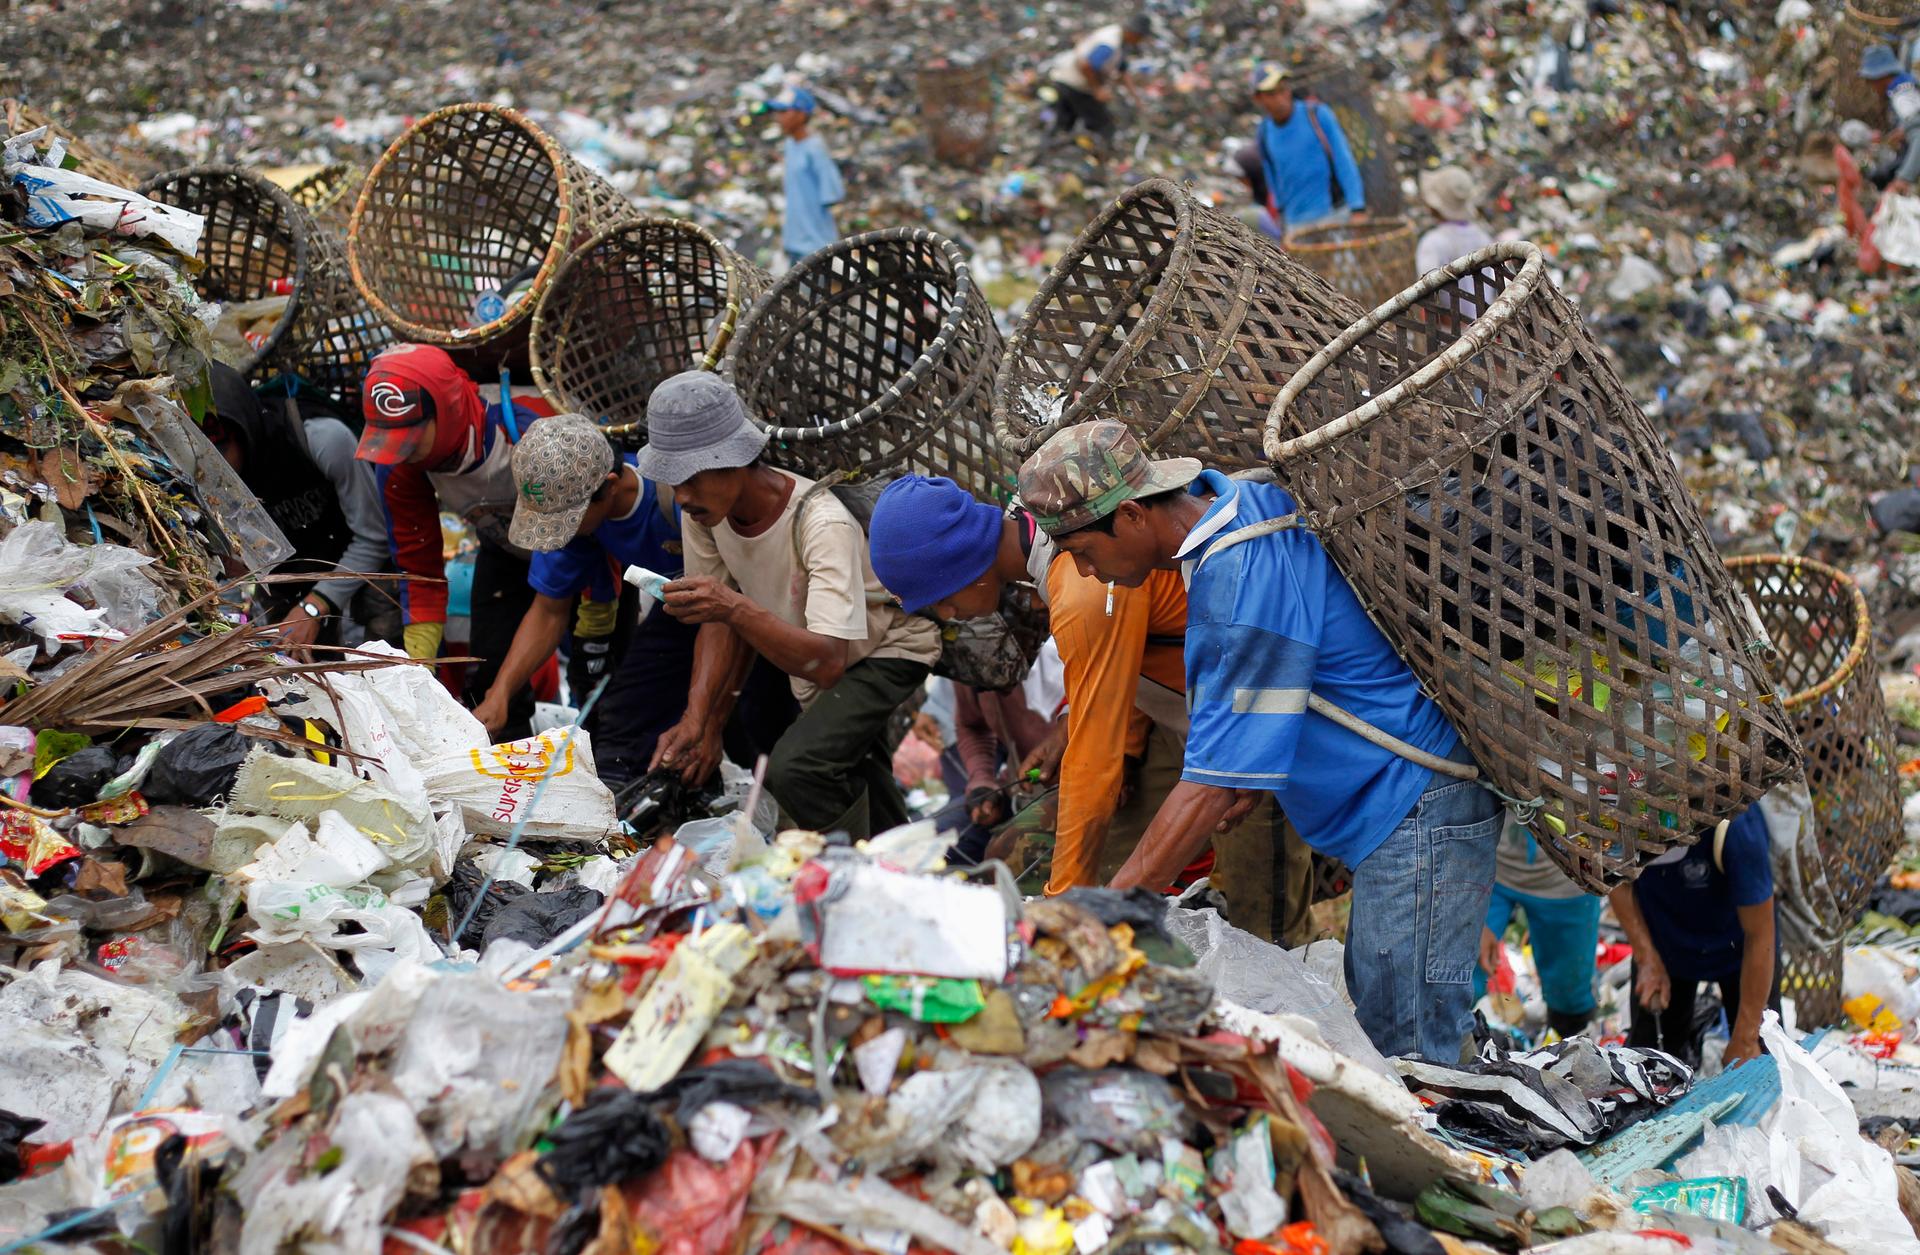 Scavengers search for items to recycle at a waste dump in Bogor, a city in Indonesia's West Java province, on June 3, 2013.